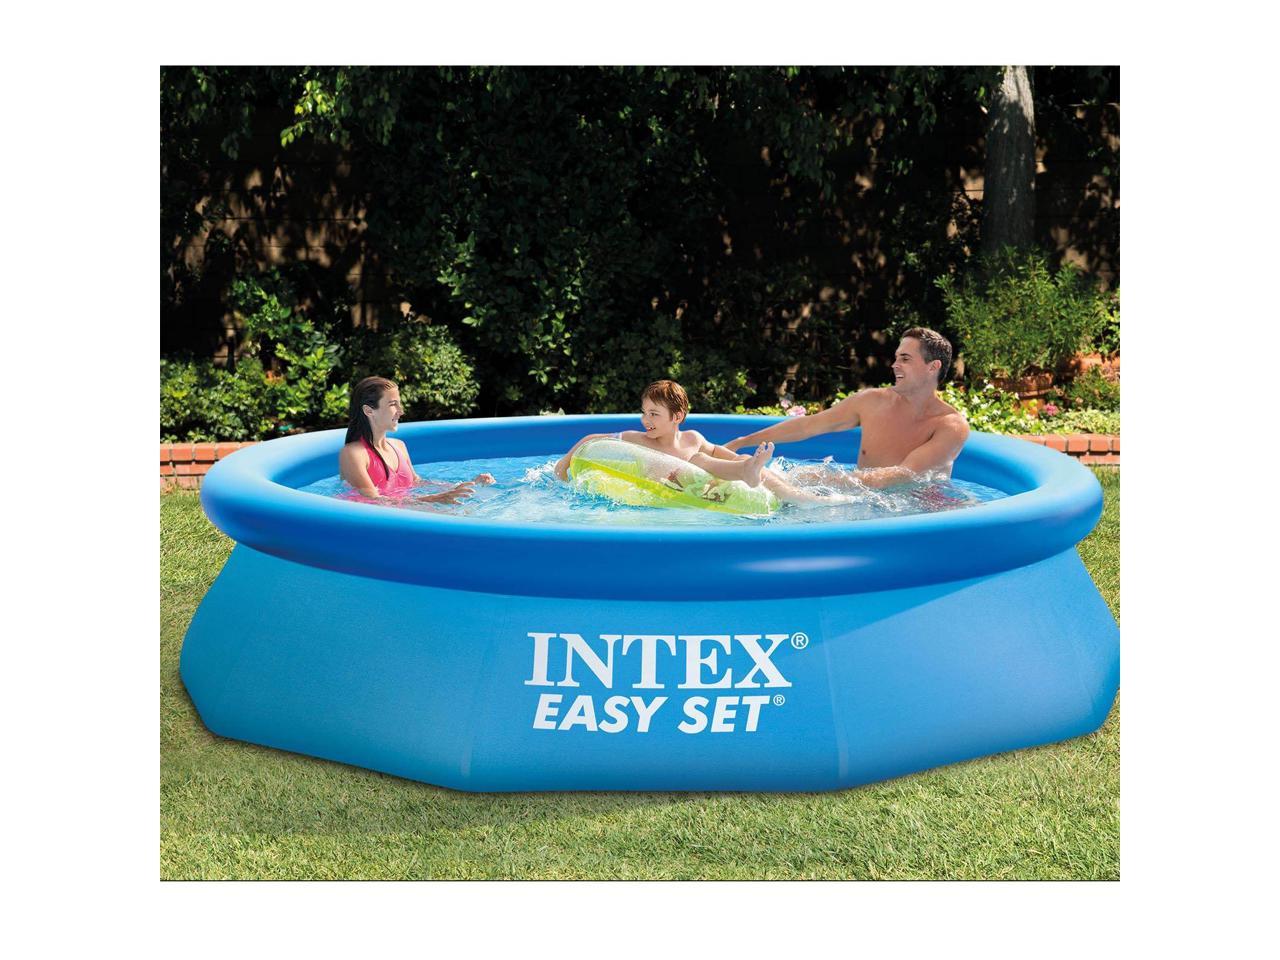 How To Hook A Water Hose To Drain Out My Easy Set Intex Above Ground Pool